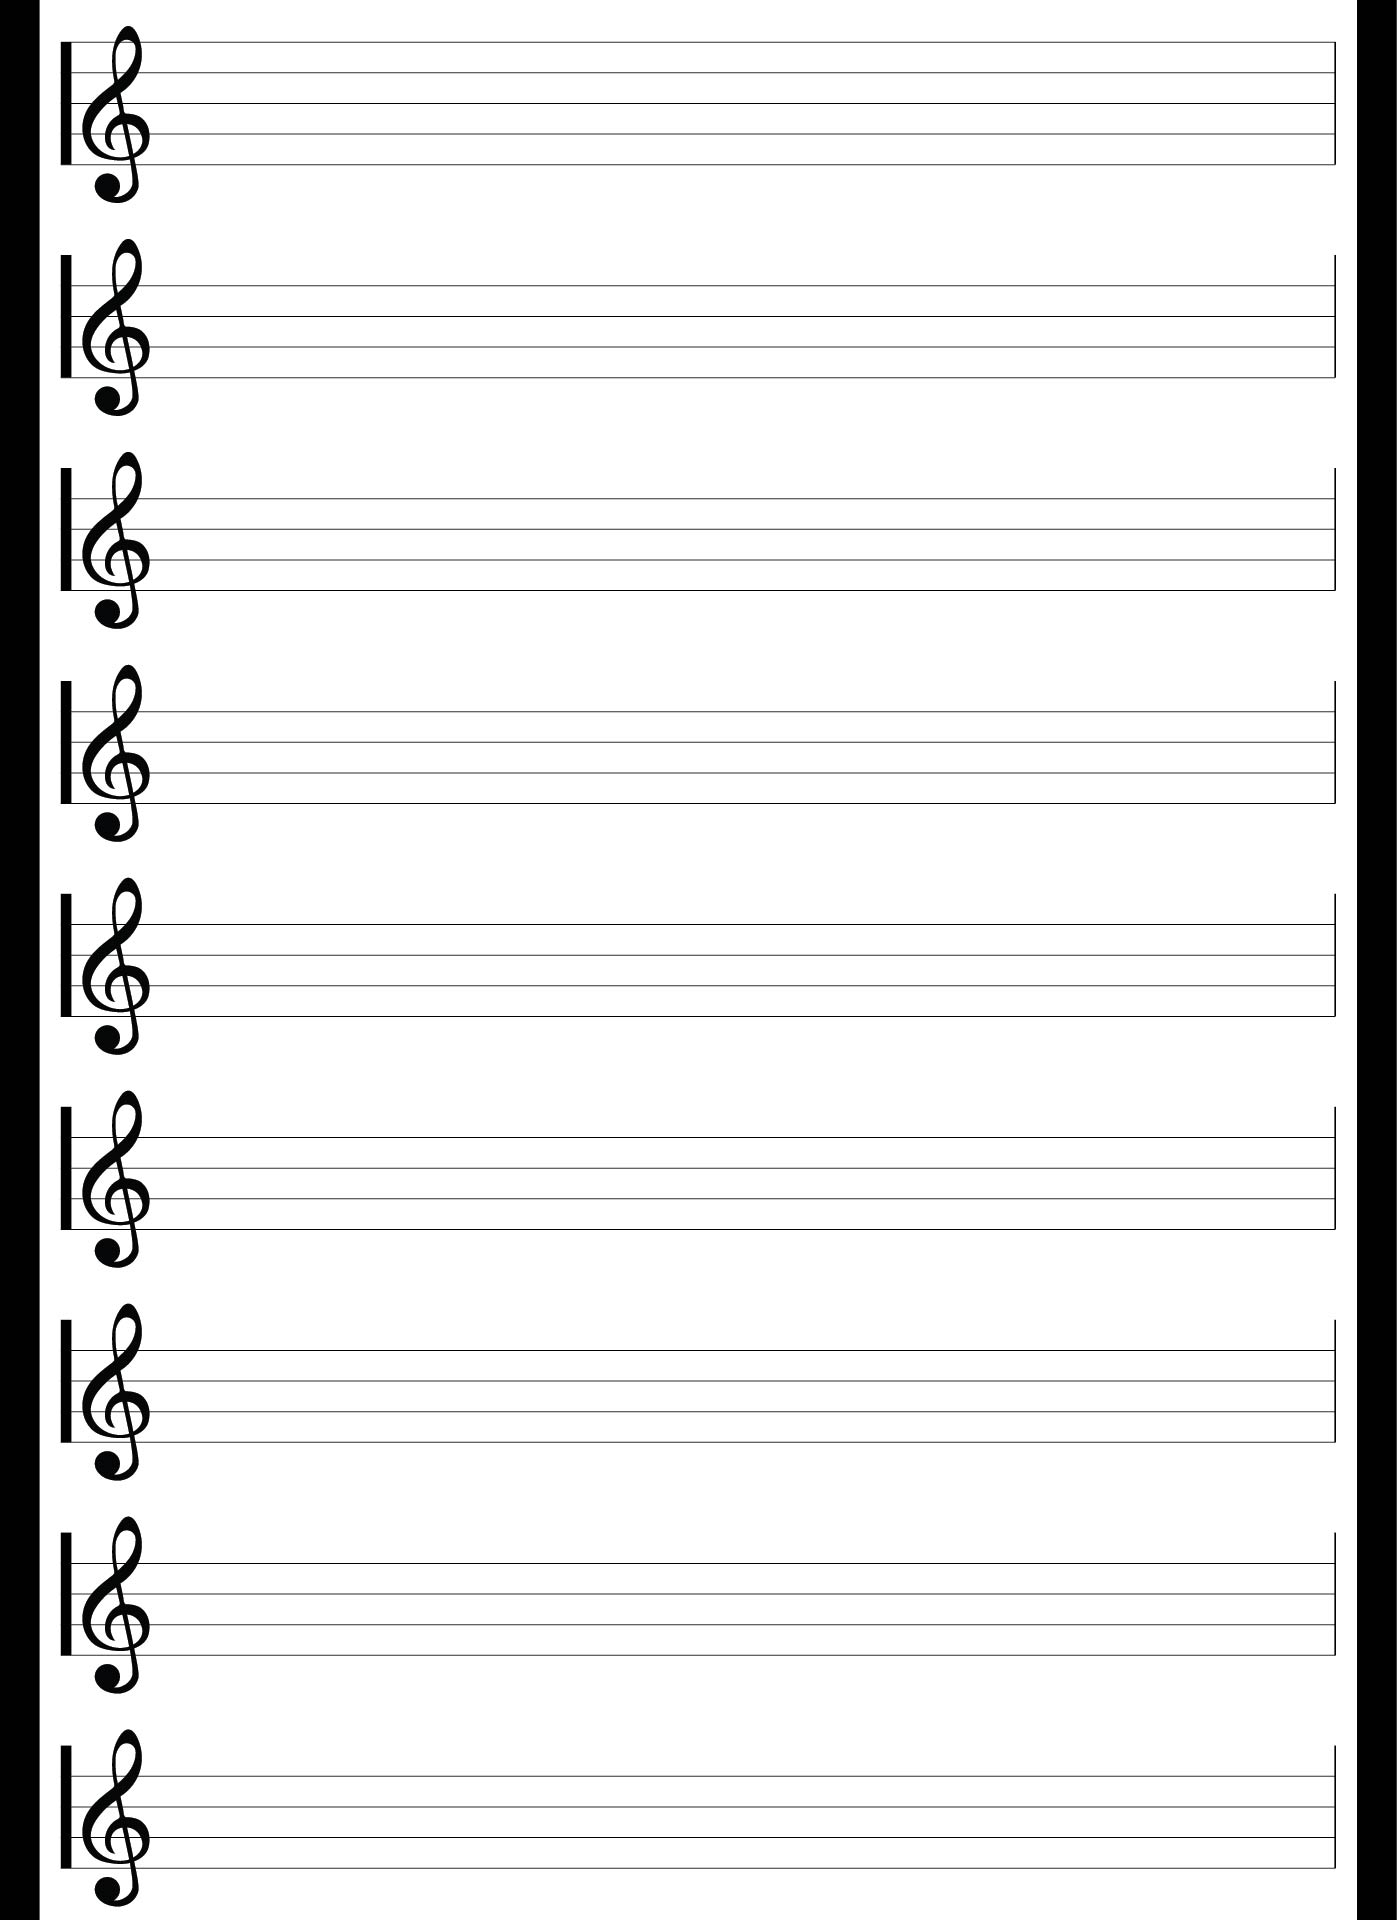 5-best-images-of-free-printable-staff-paper-blank-sheet-music-blank-guitar-sheet-music-paper